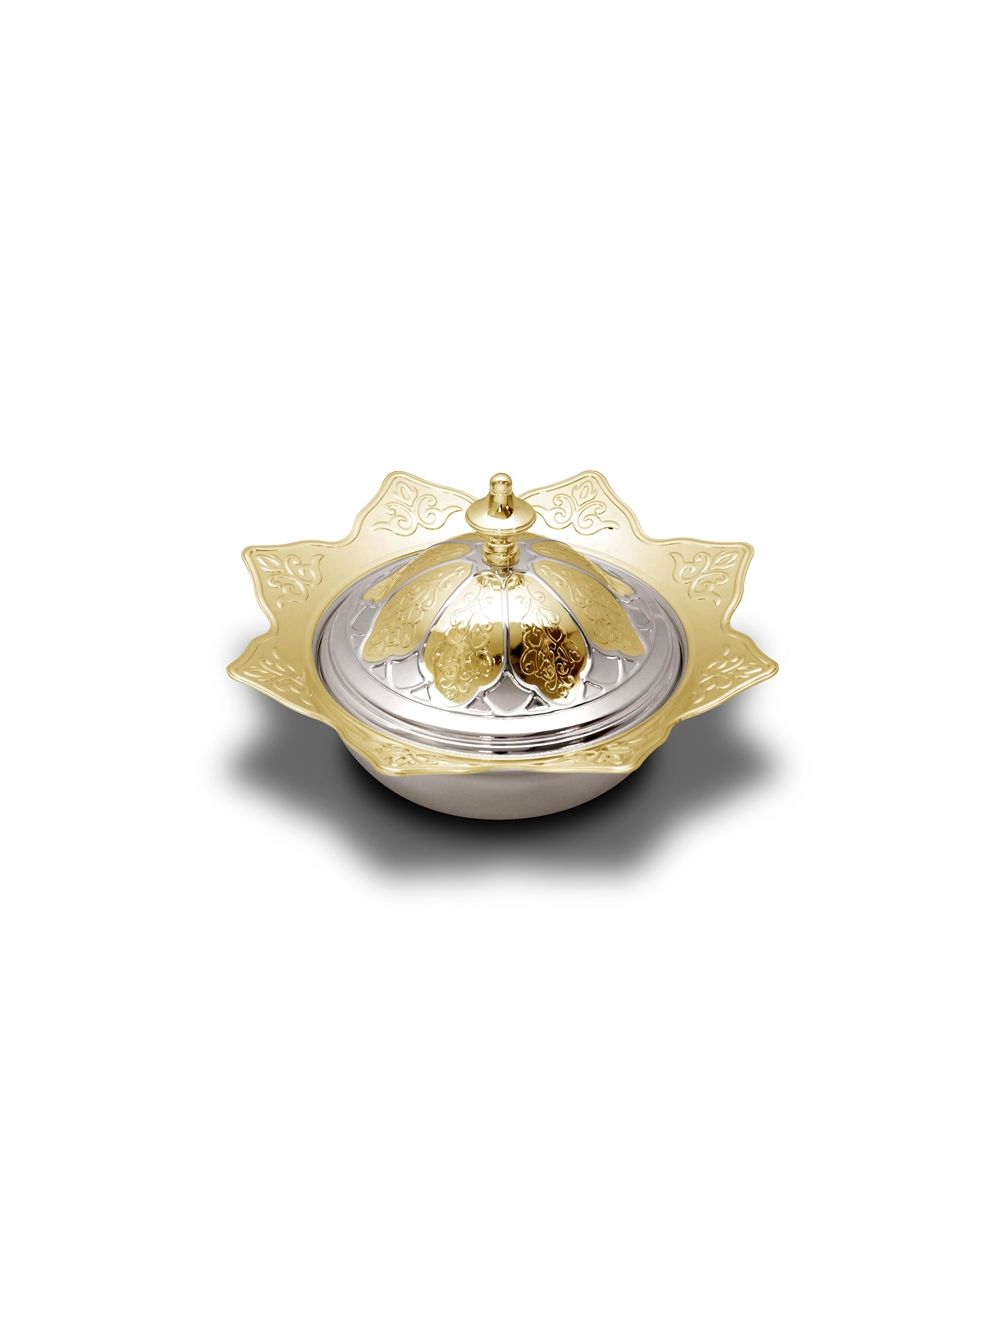 Sugar Bowl Silver and Gold Flower Design 2Pc